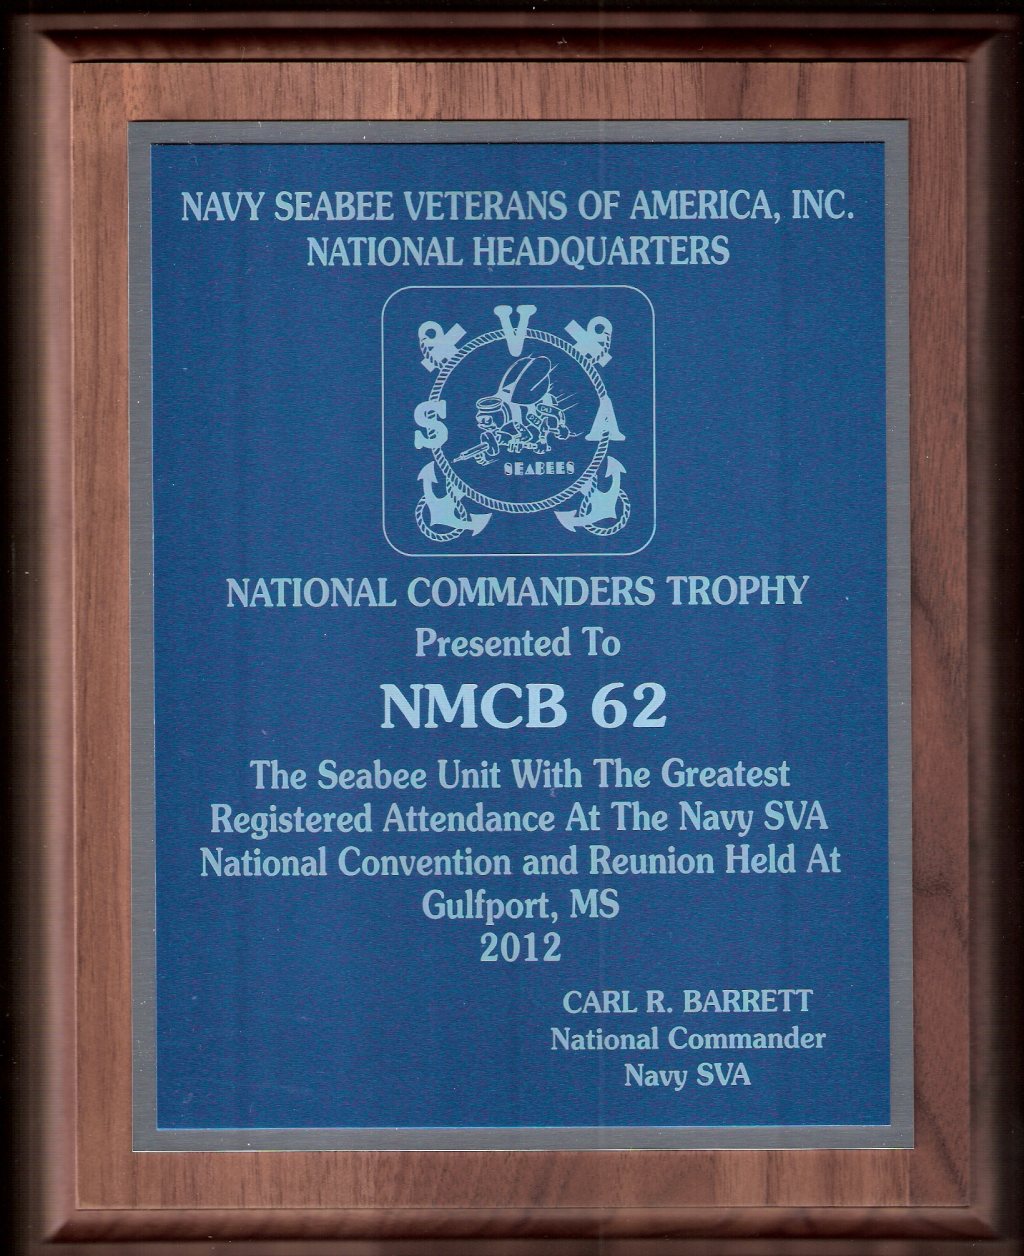 National Commanders Trophy October 2012 National Convention Gulfport, MS